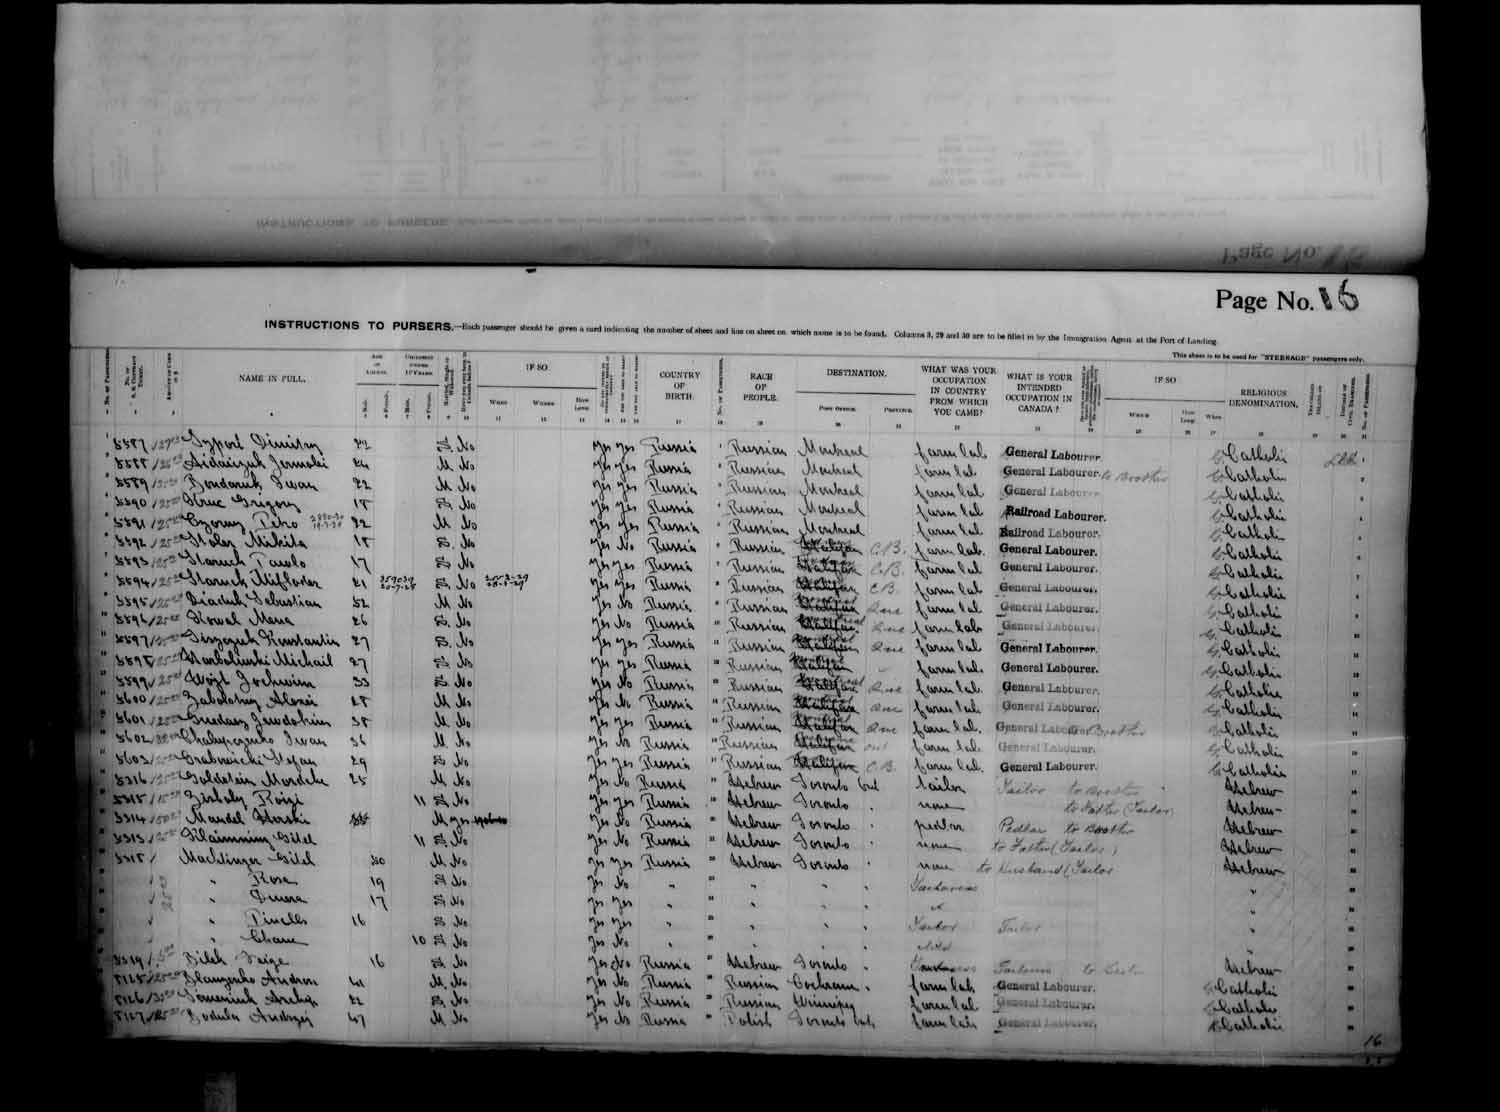 Digitized page of Passenger Lists for Image No.: e003686924